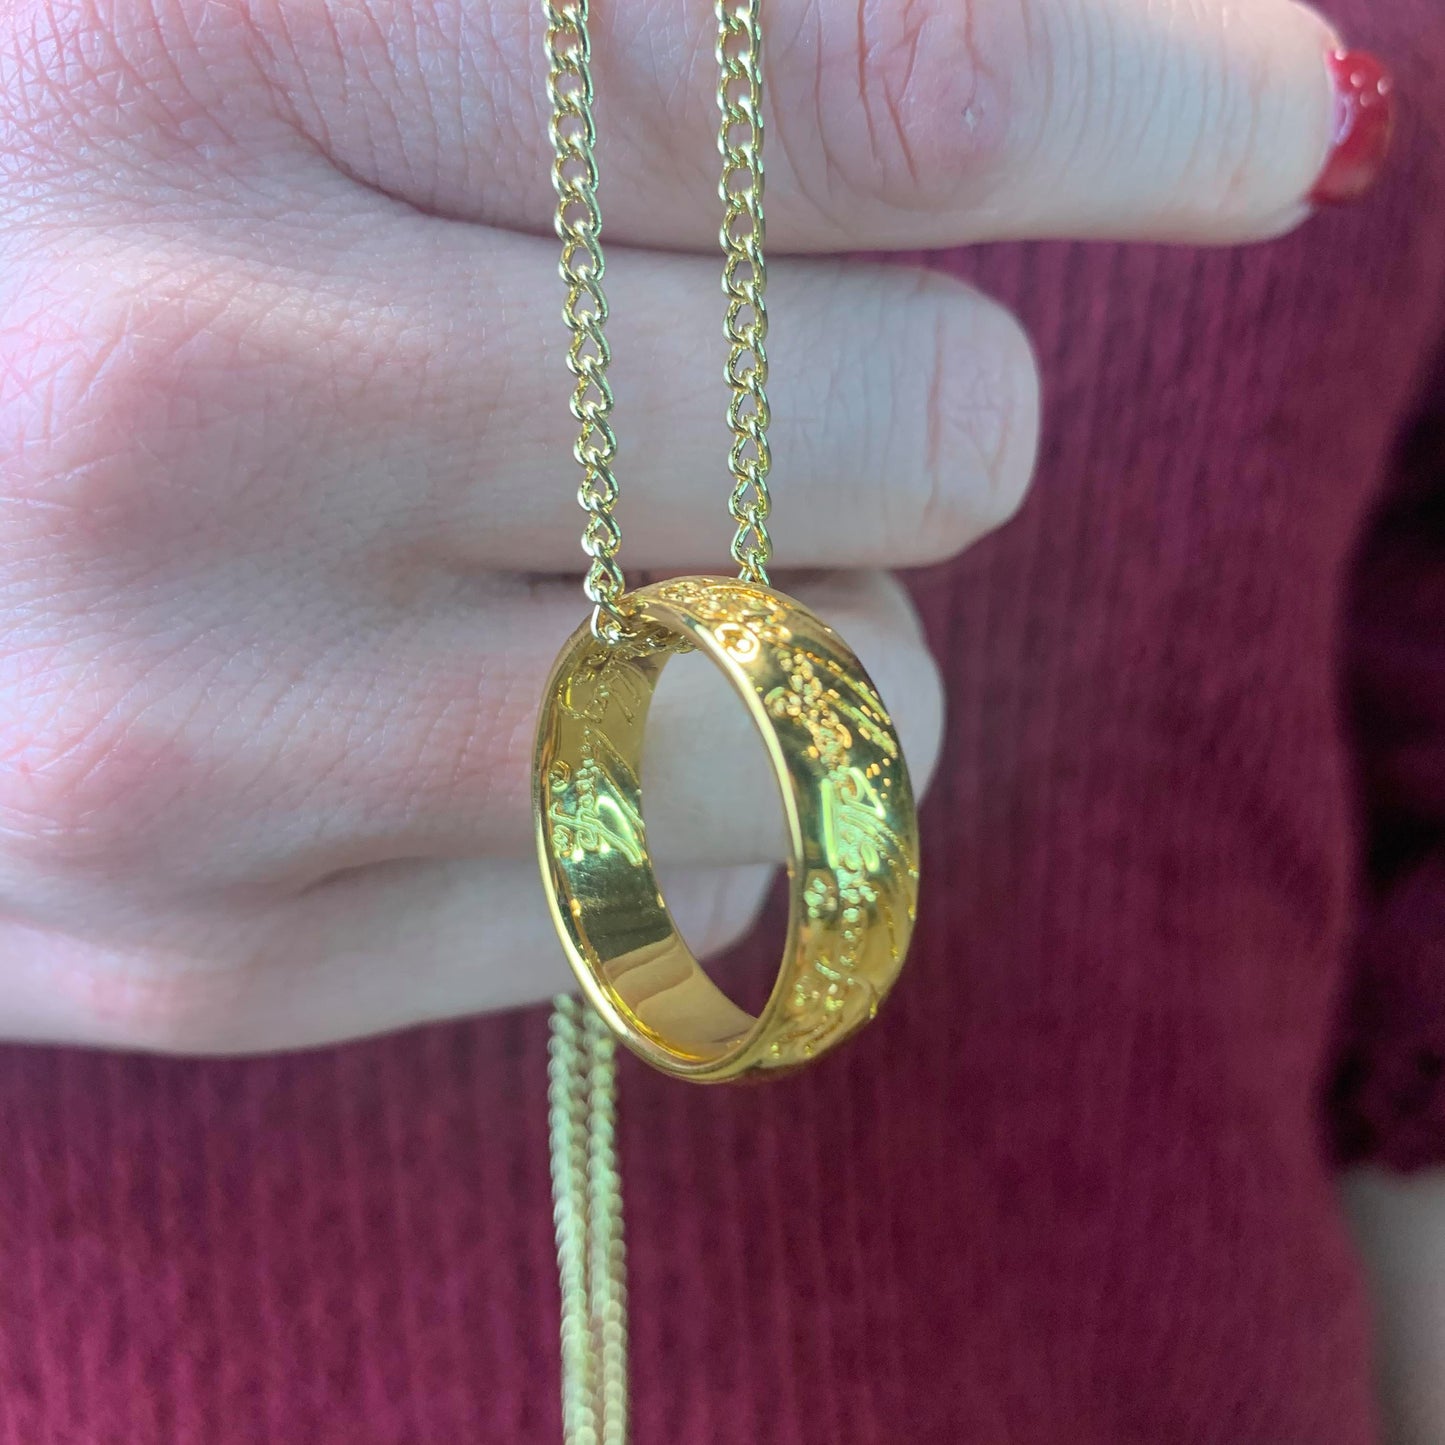 PROMISE Ring Necklace– The Hexad